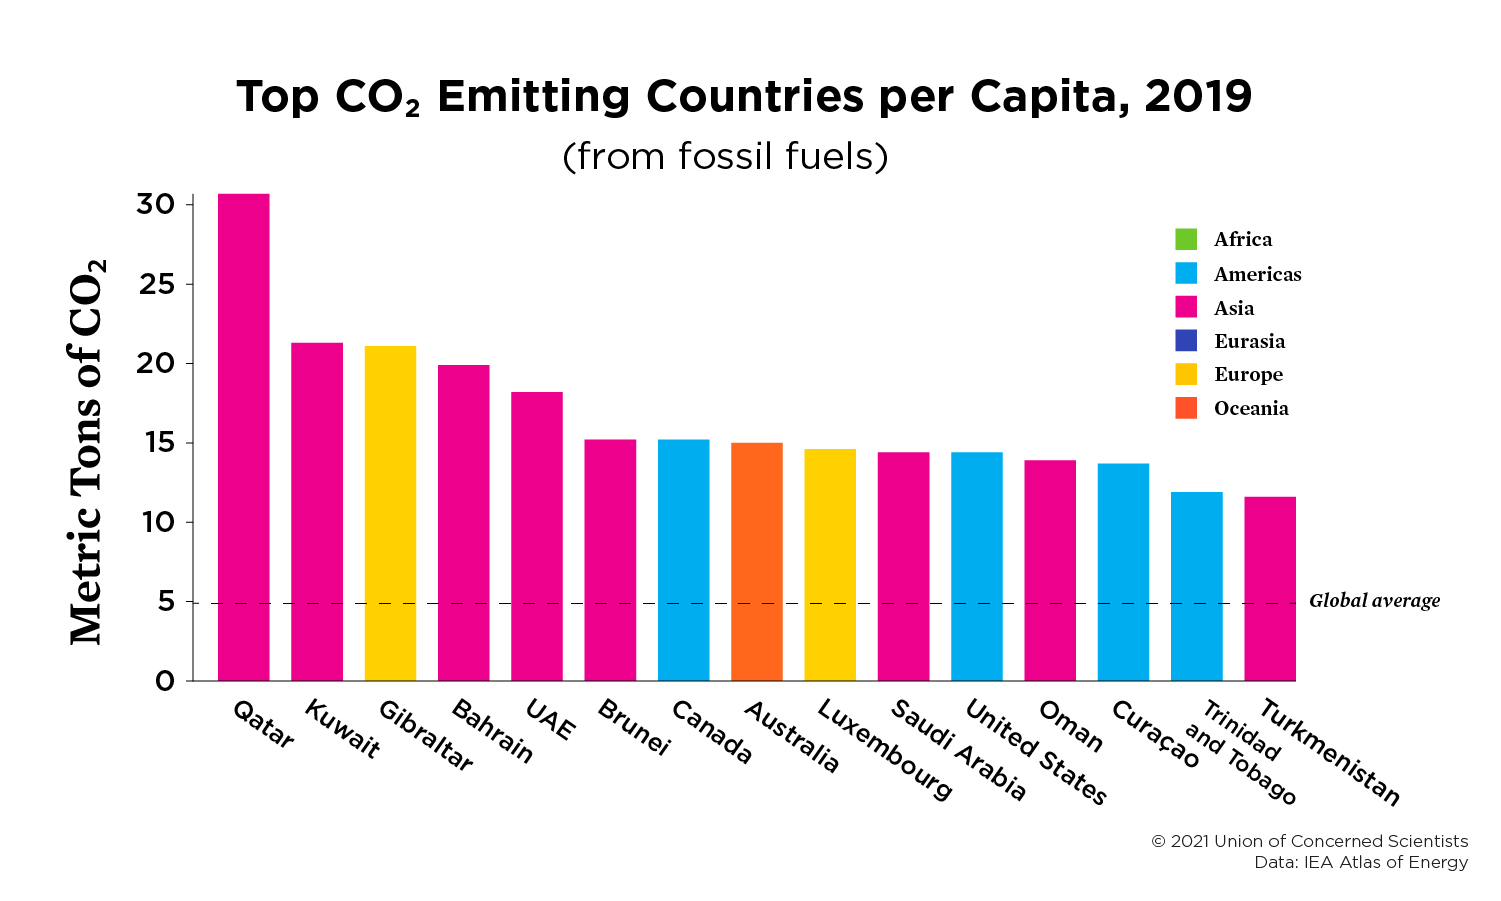 A bar graph showing the top CO2 emitting countries per capita in 2019